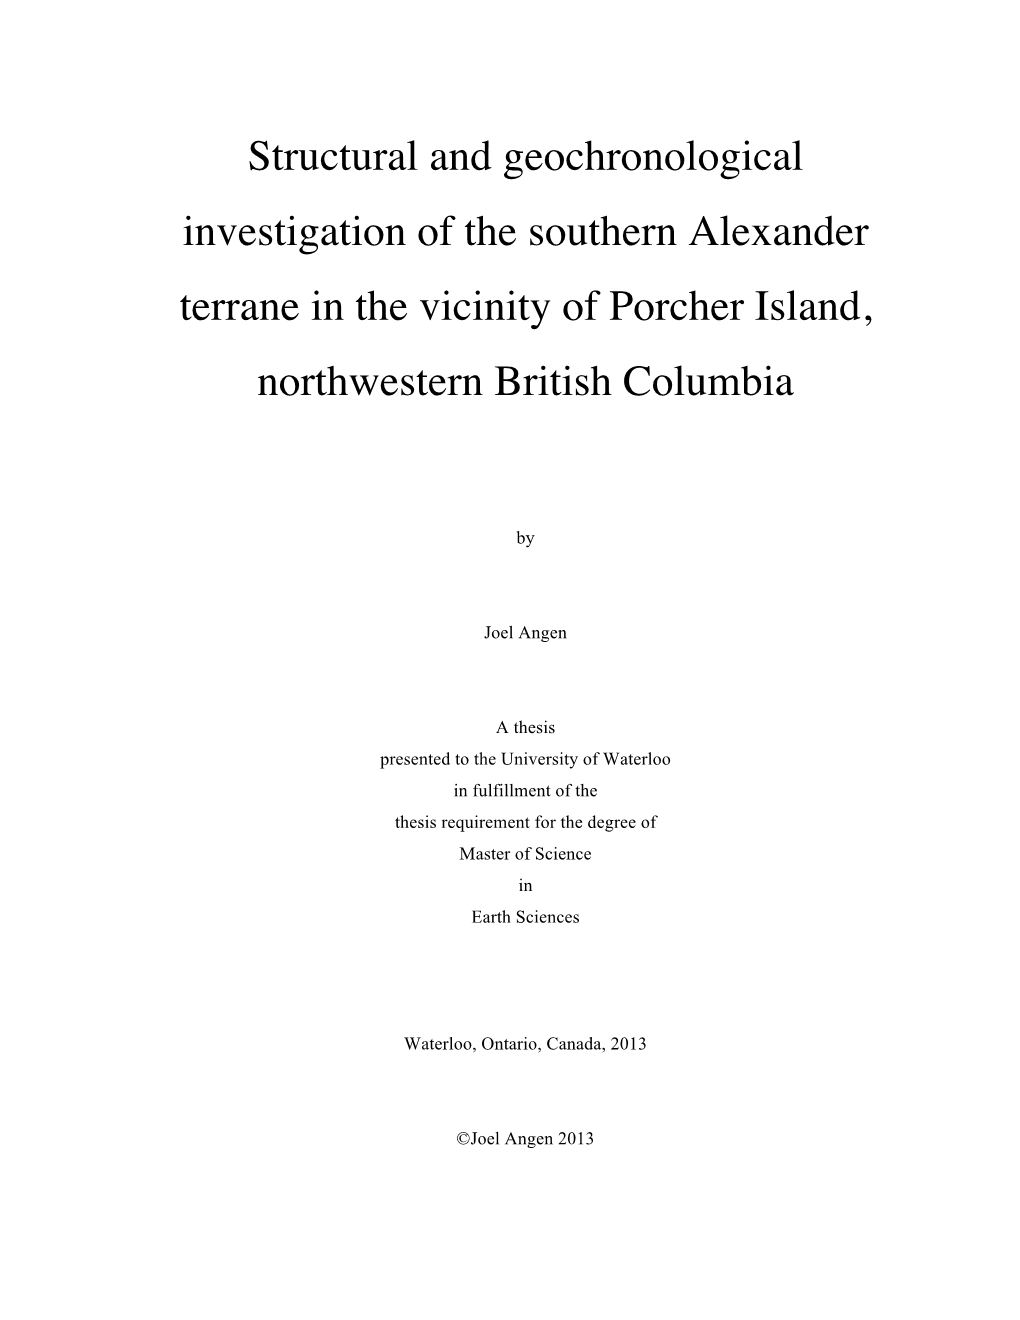 Structural and Geochronological Investigation of the Southern Alexander Terrane in the Vicinity of Porcher Island, Northwestern